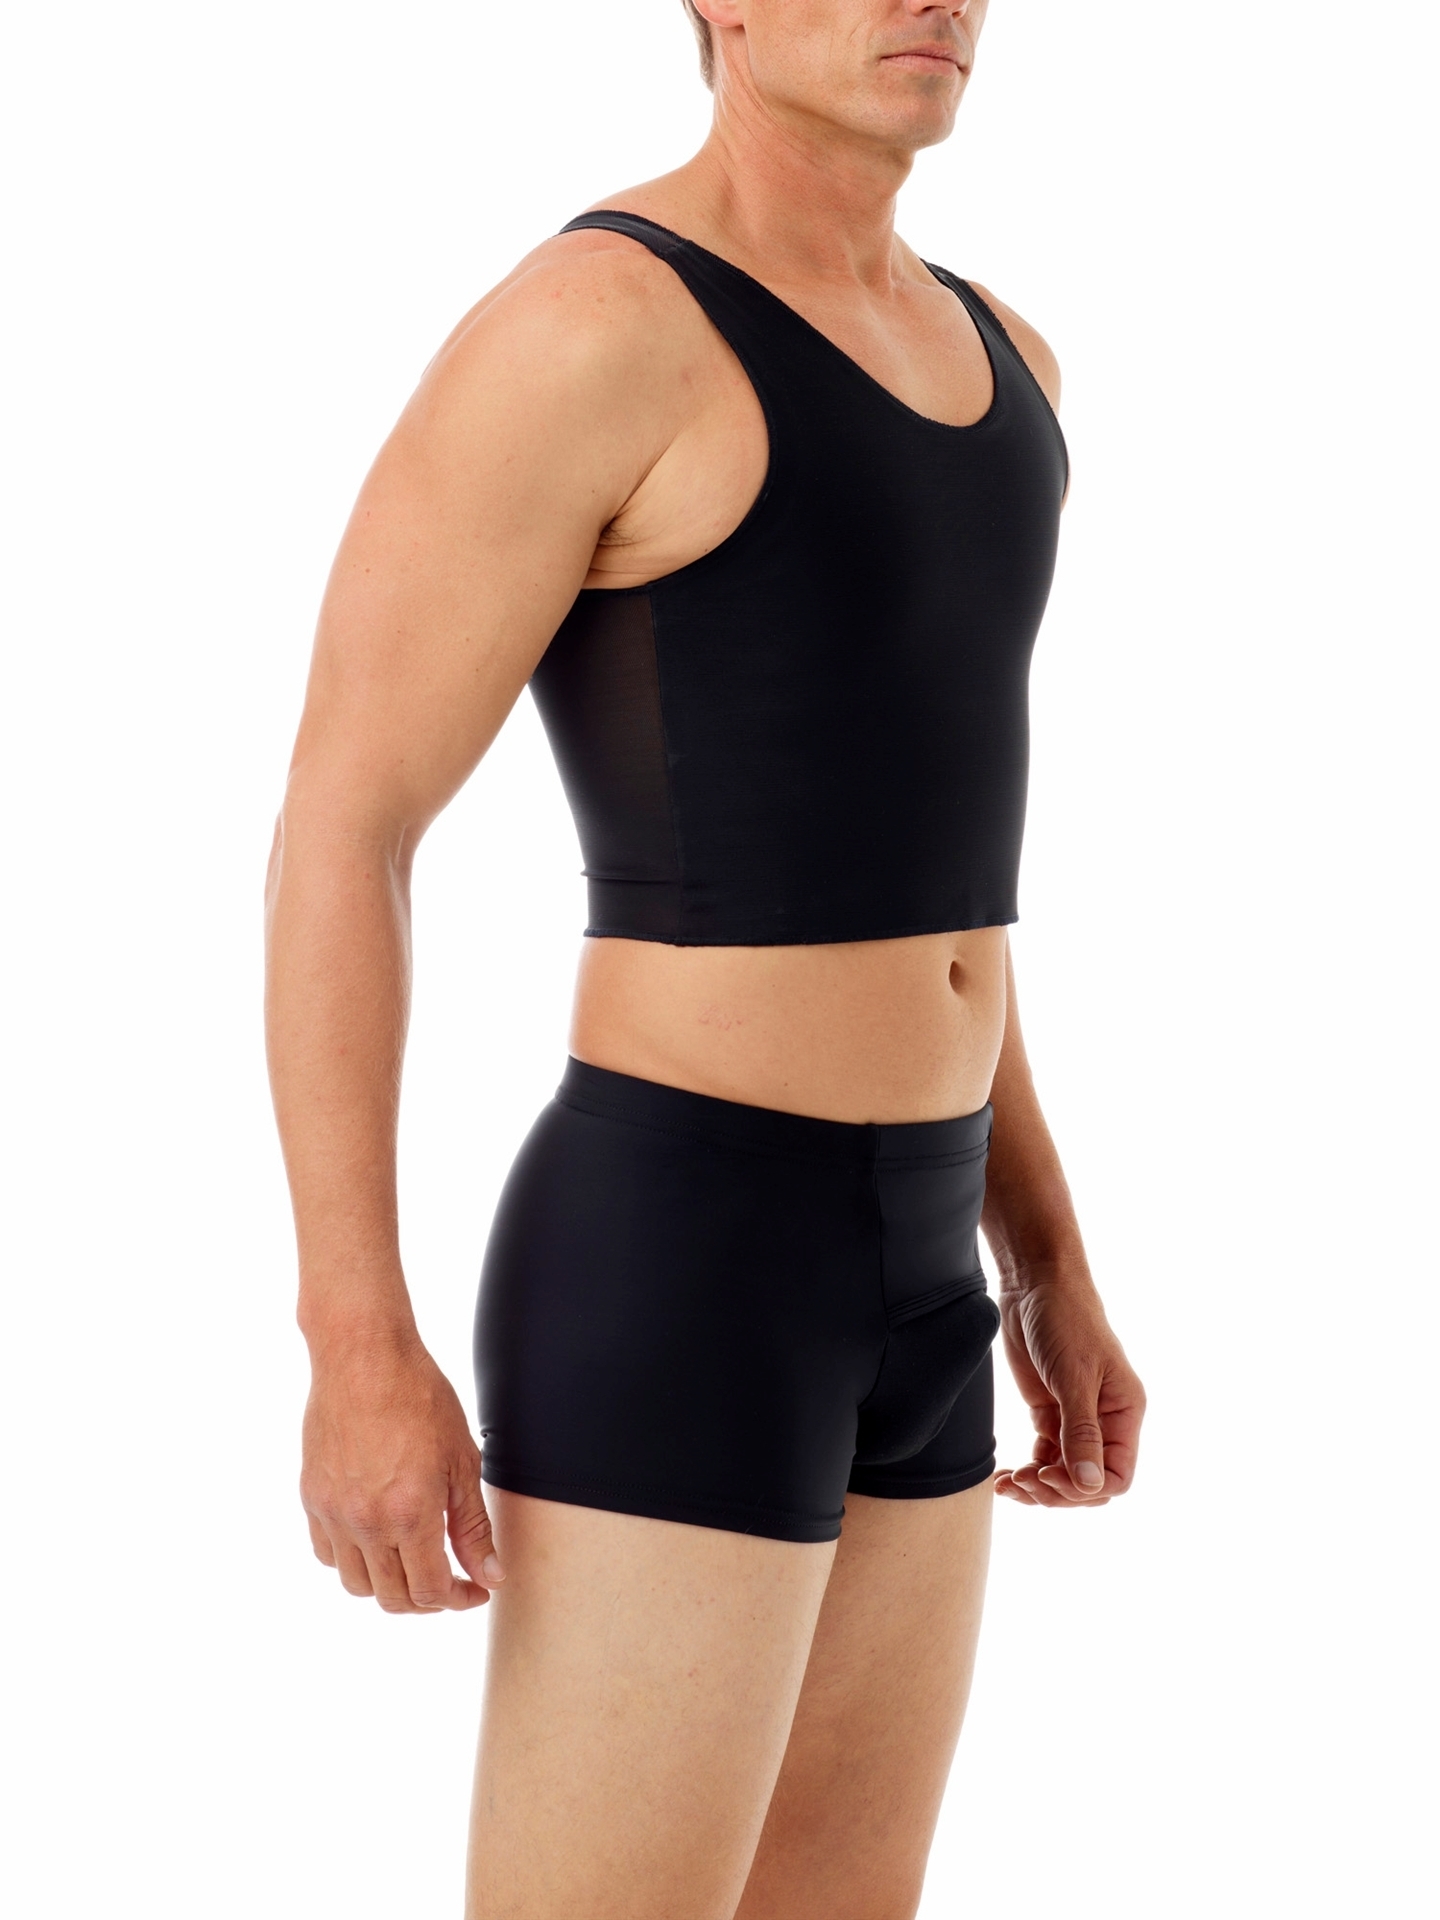 Tri-top Chest Binder - provide maximum comfortable and extreme chest binding..  Men Compression Shirts, Girdles, Chest Binders, Hernia Garments